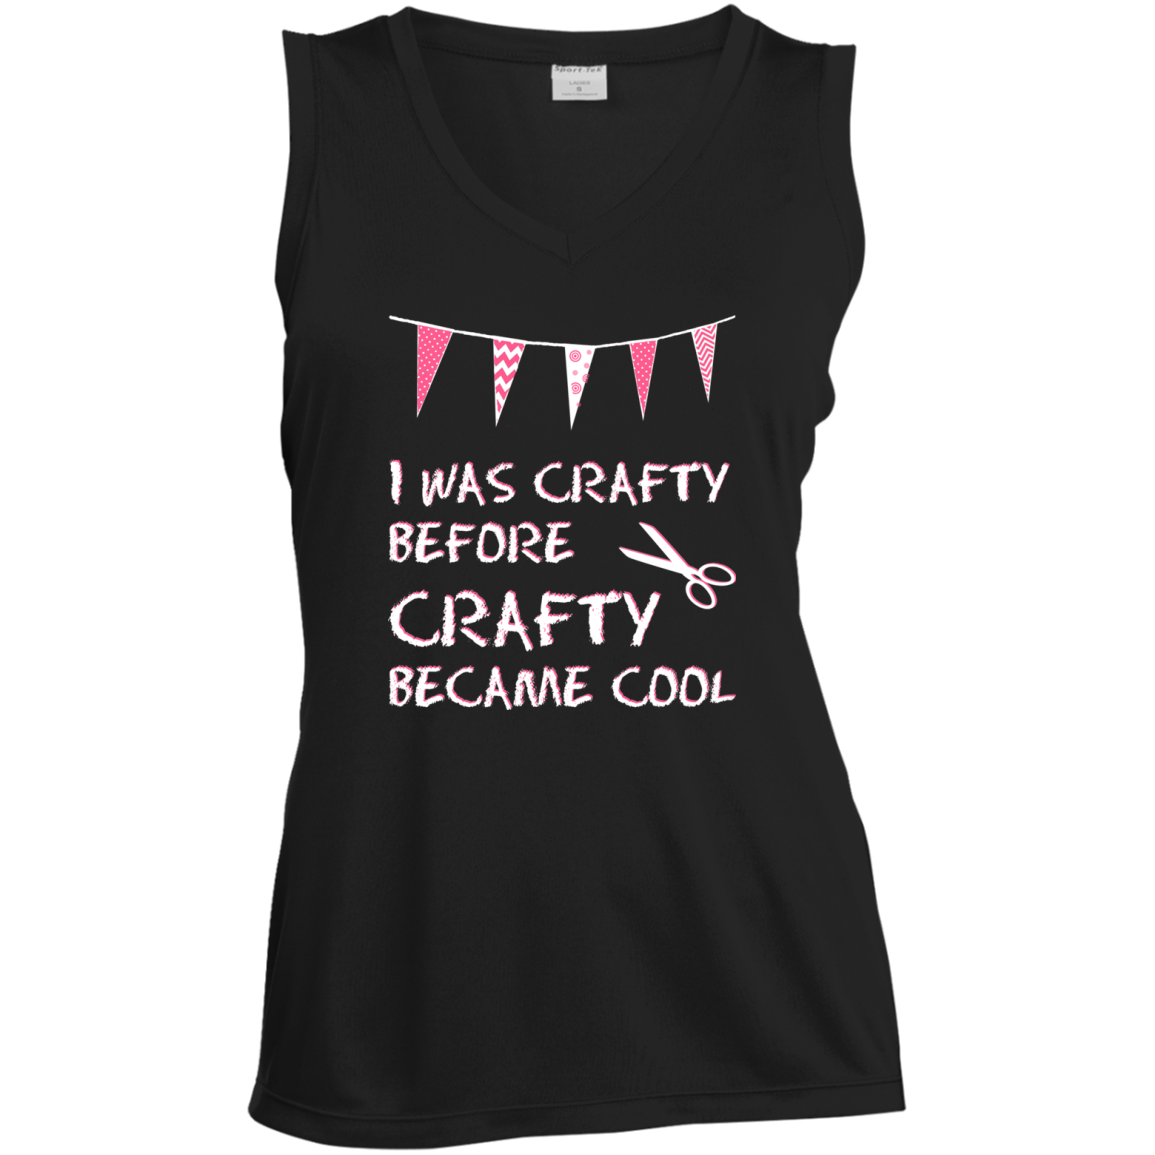 I Was Crafty Before Crafty Became Cool Ladies' Sleeveless Moisture Absorbing V-Neck